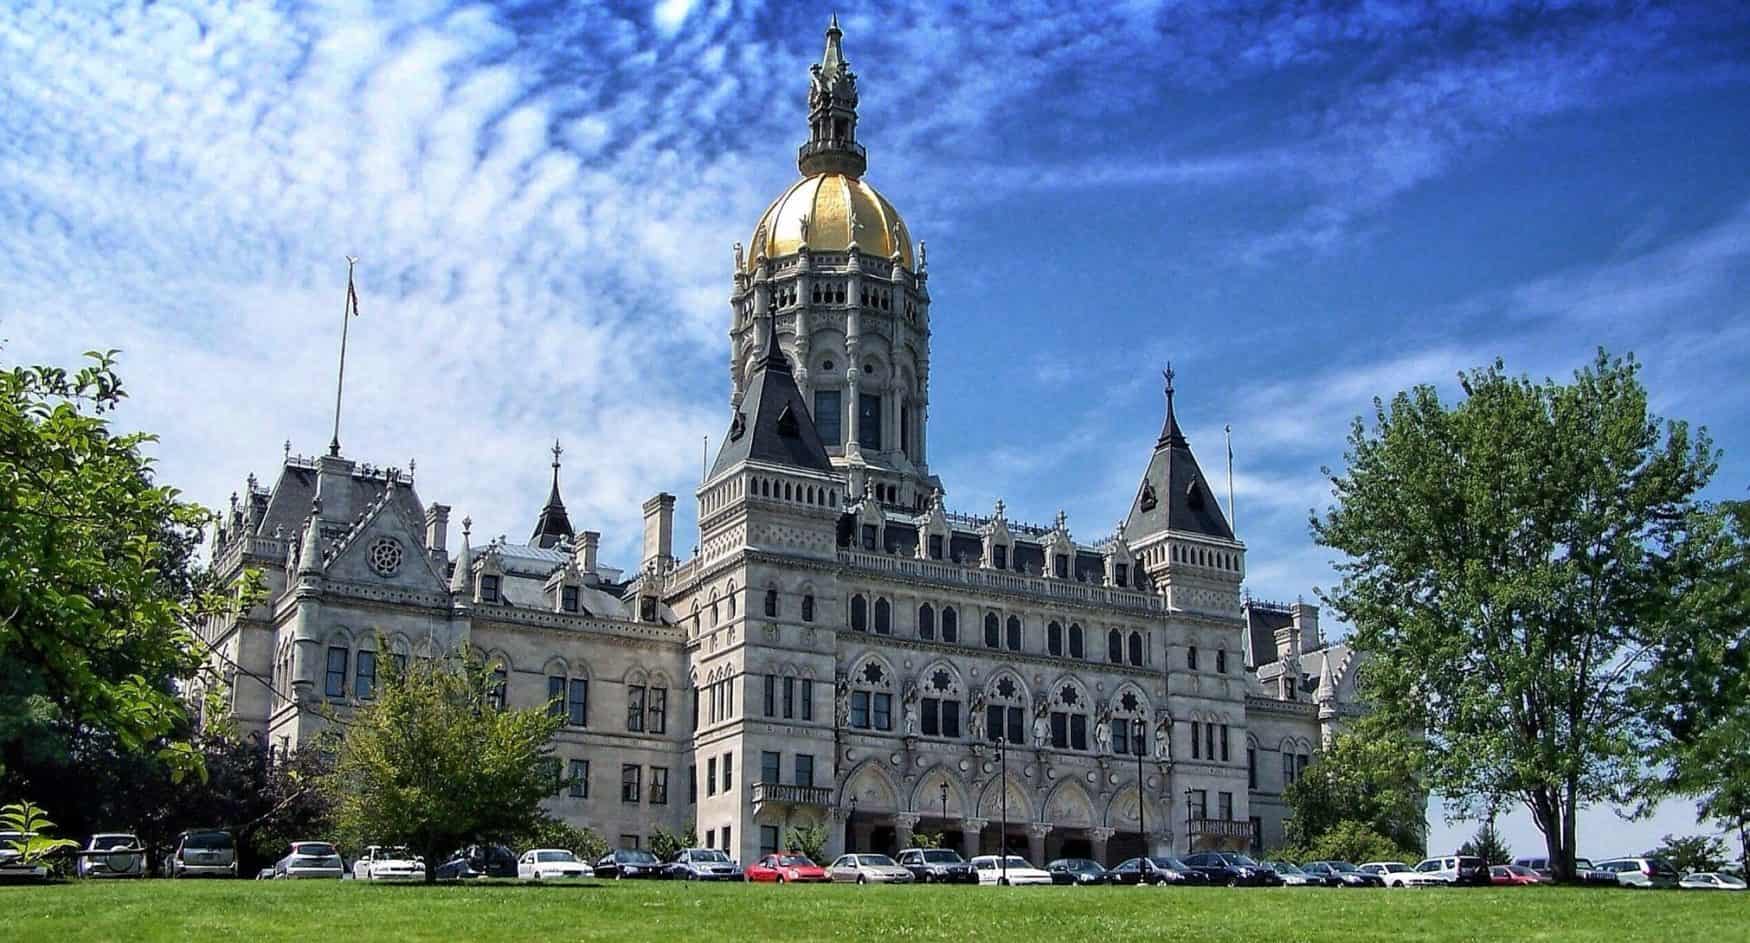 Connecticut State capital